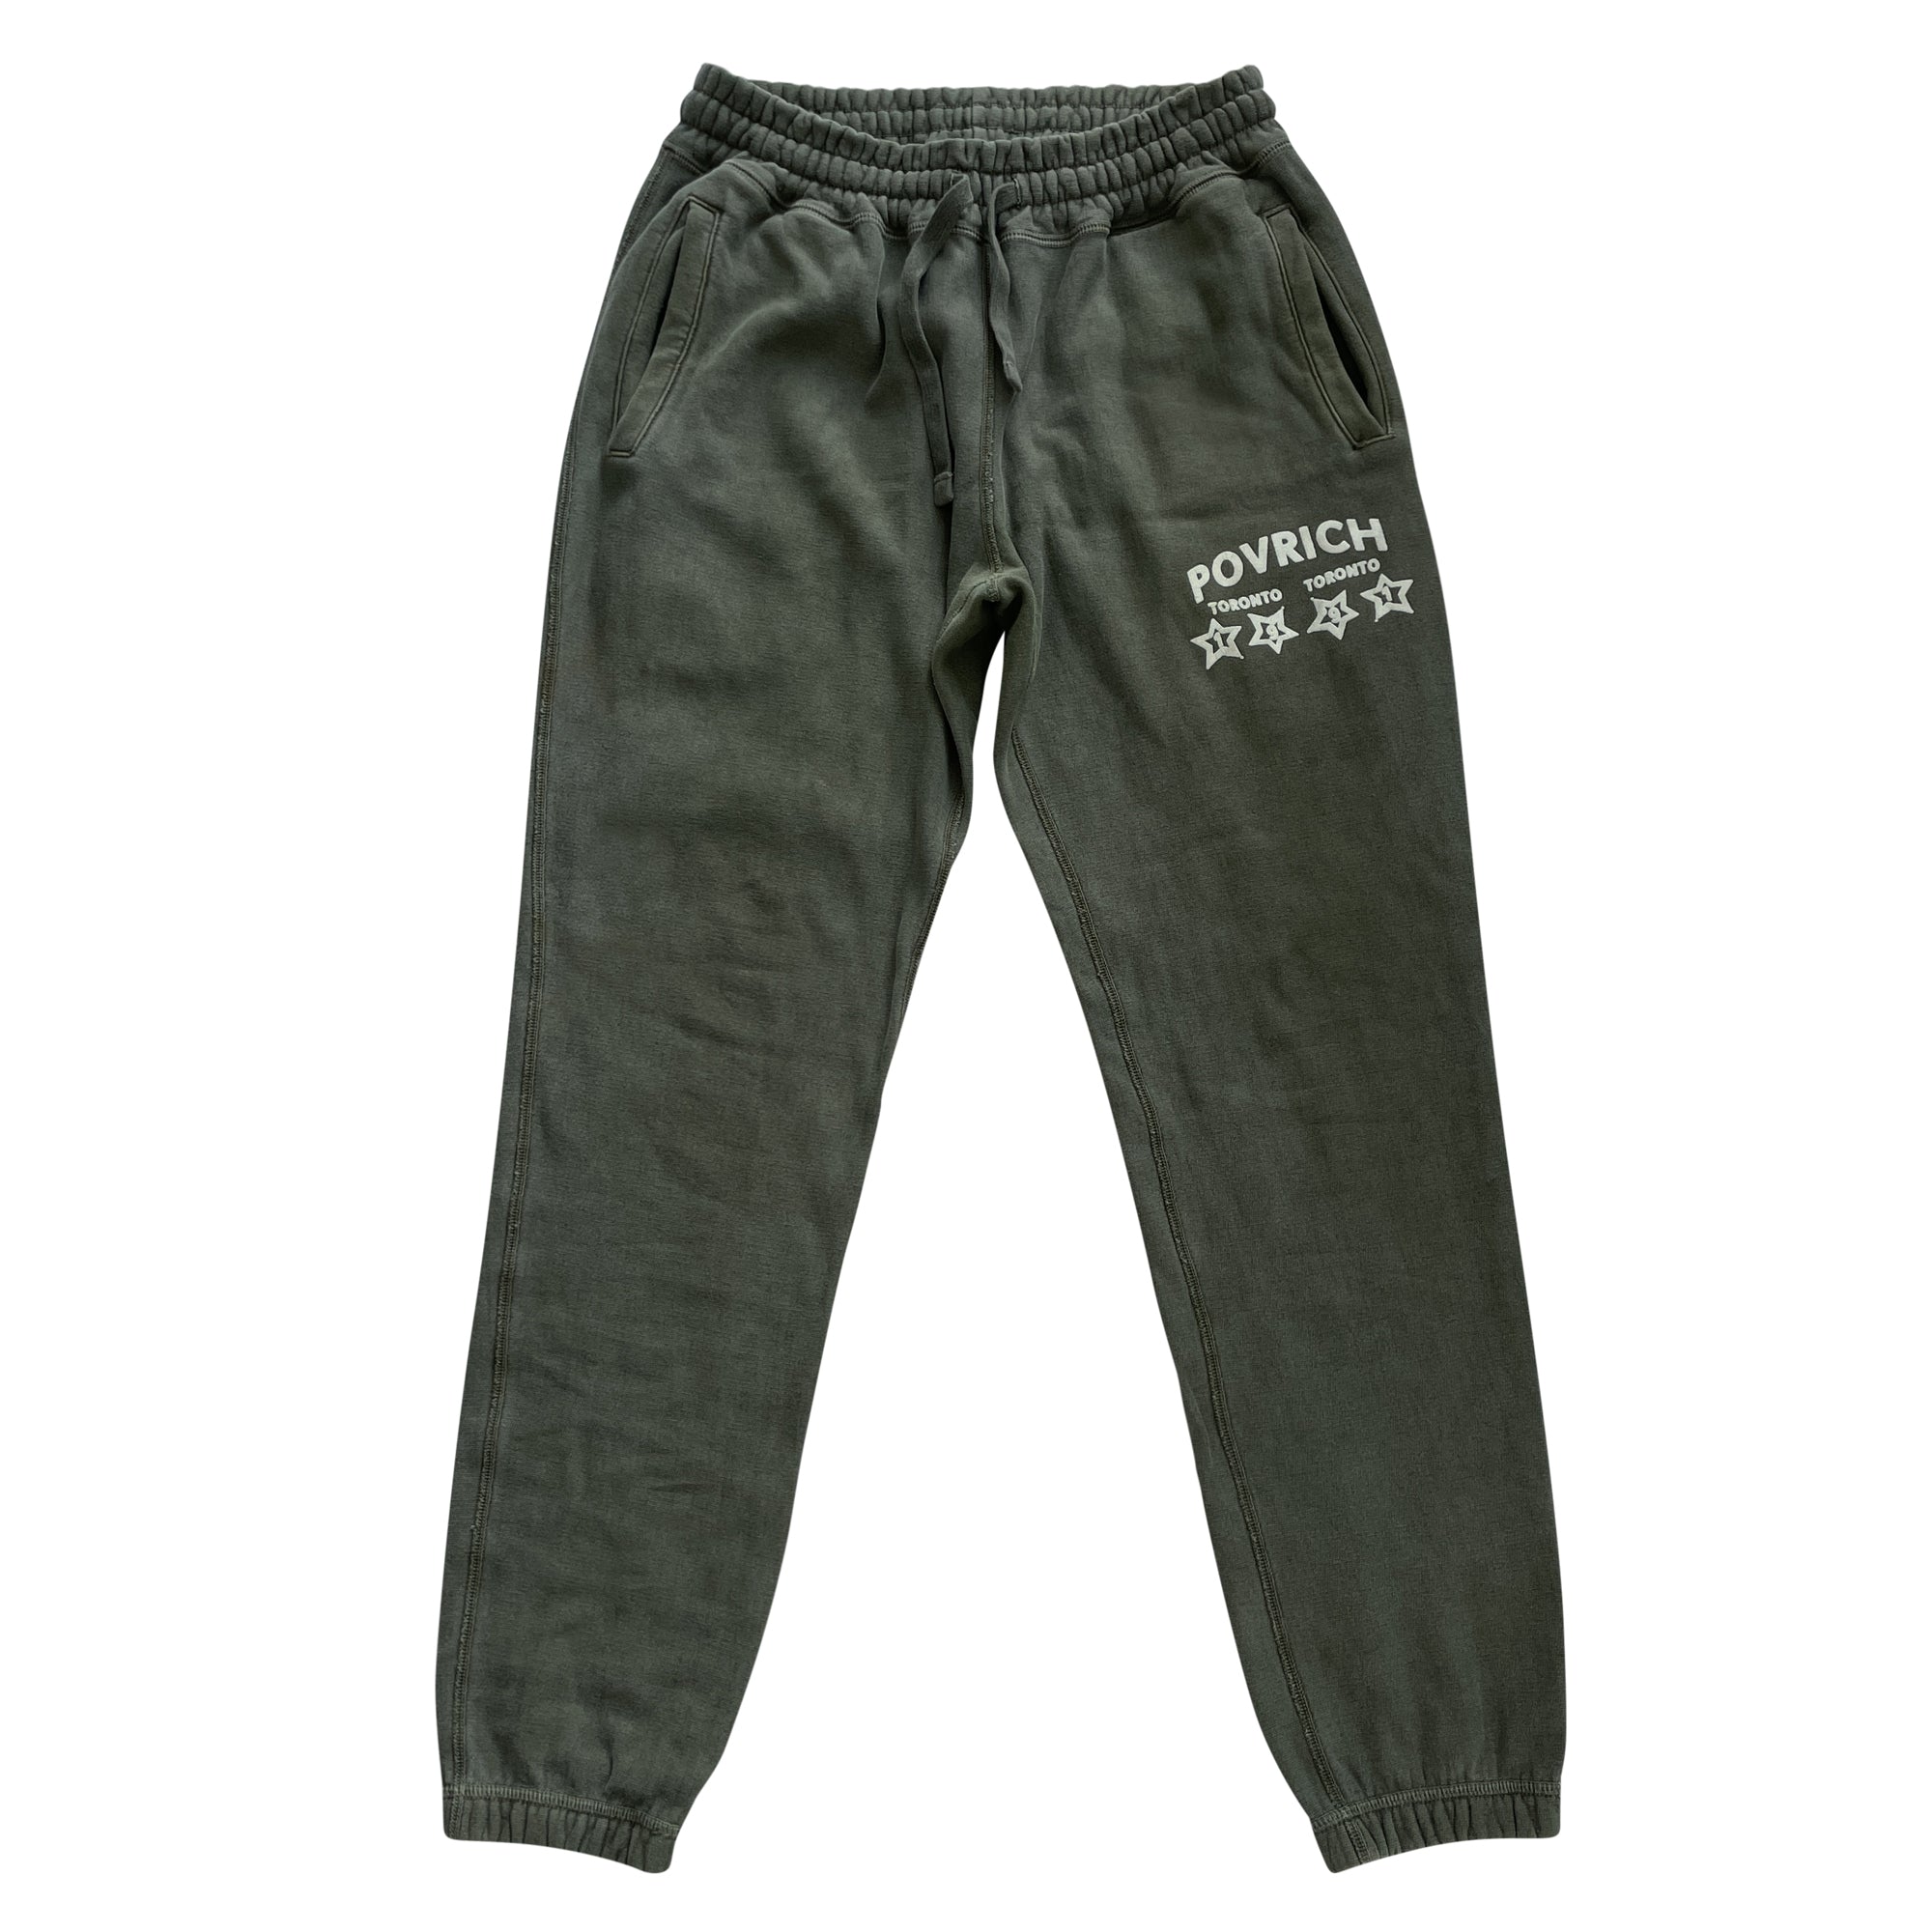 400GSM Jogger pants with ribbed cuffs and waistband. Comfortable and stylish streetwear for men and women.